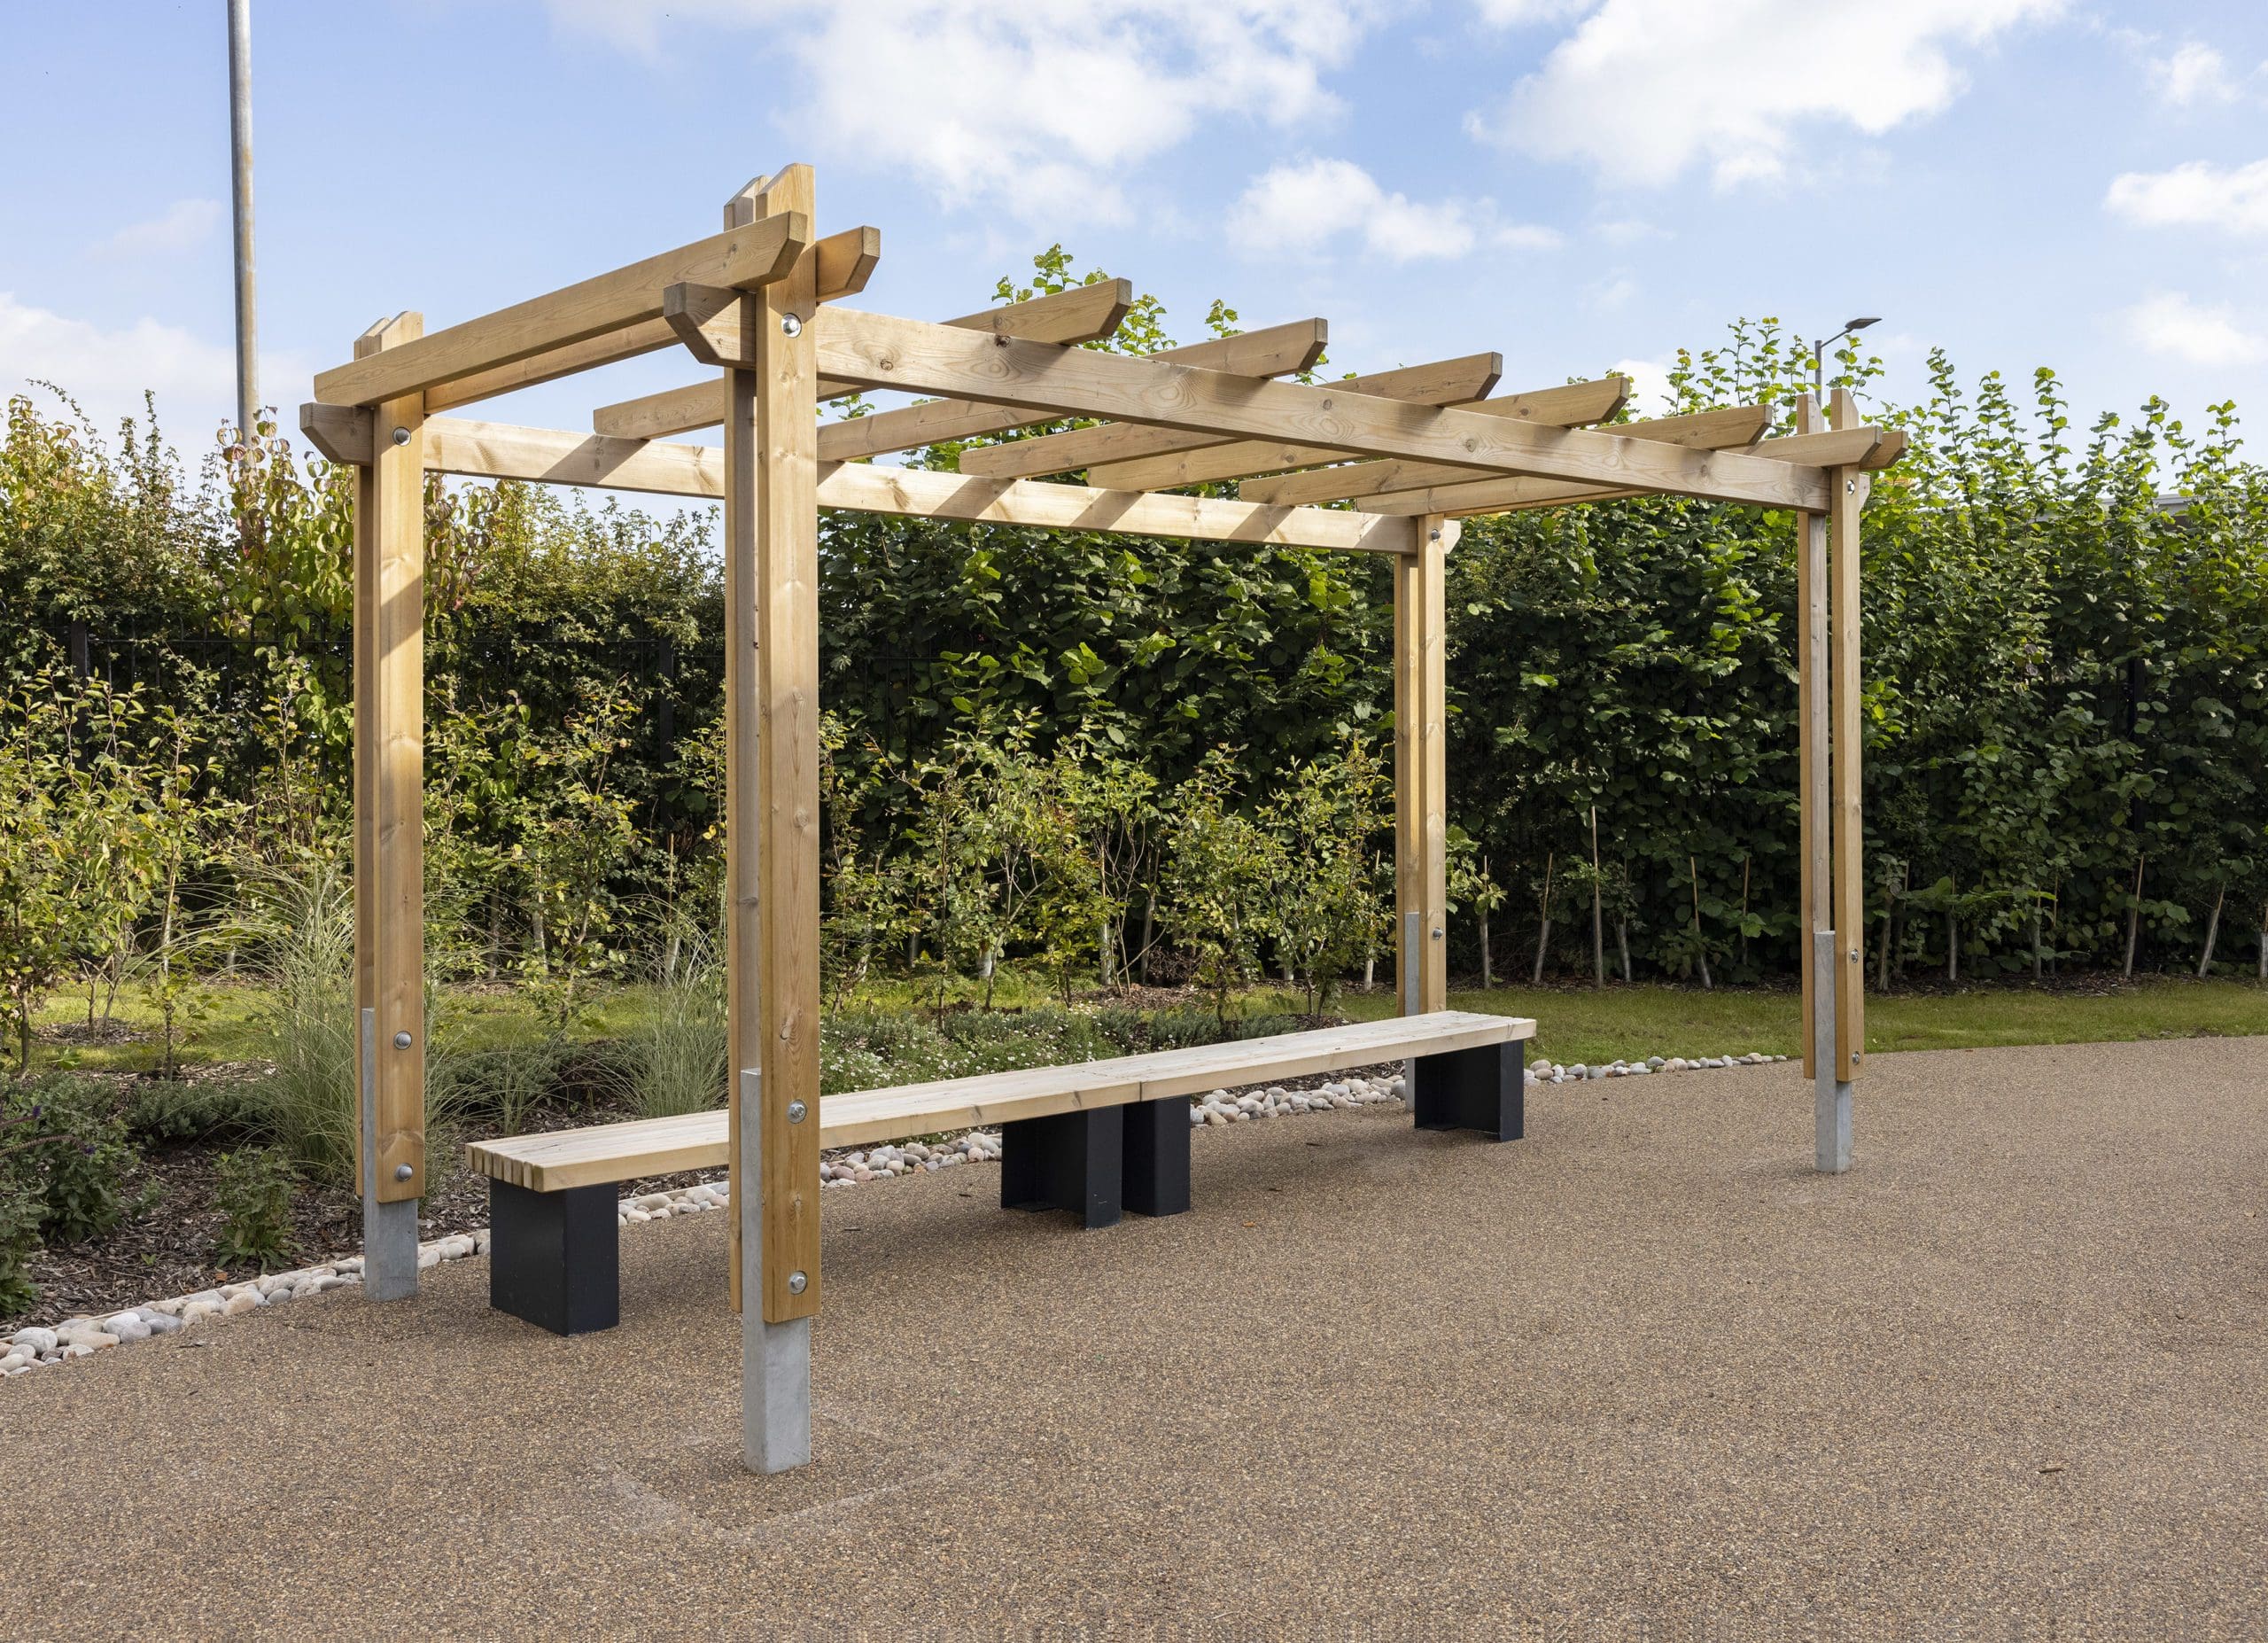 Outdoor wooden pergola canopy above two wooden benches with black plinth legs